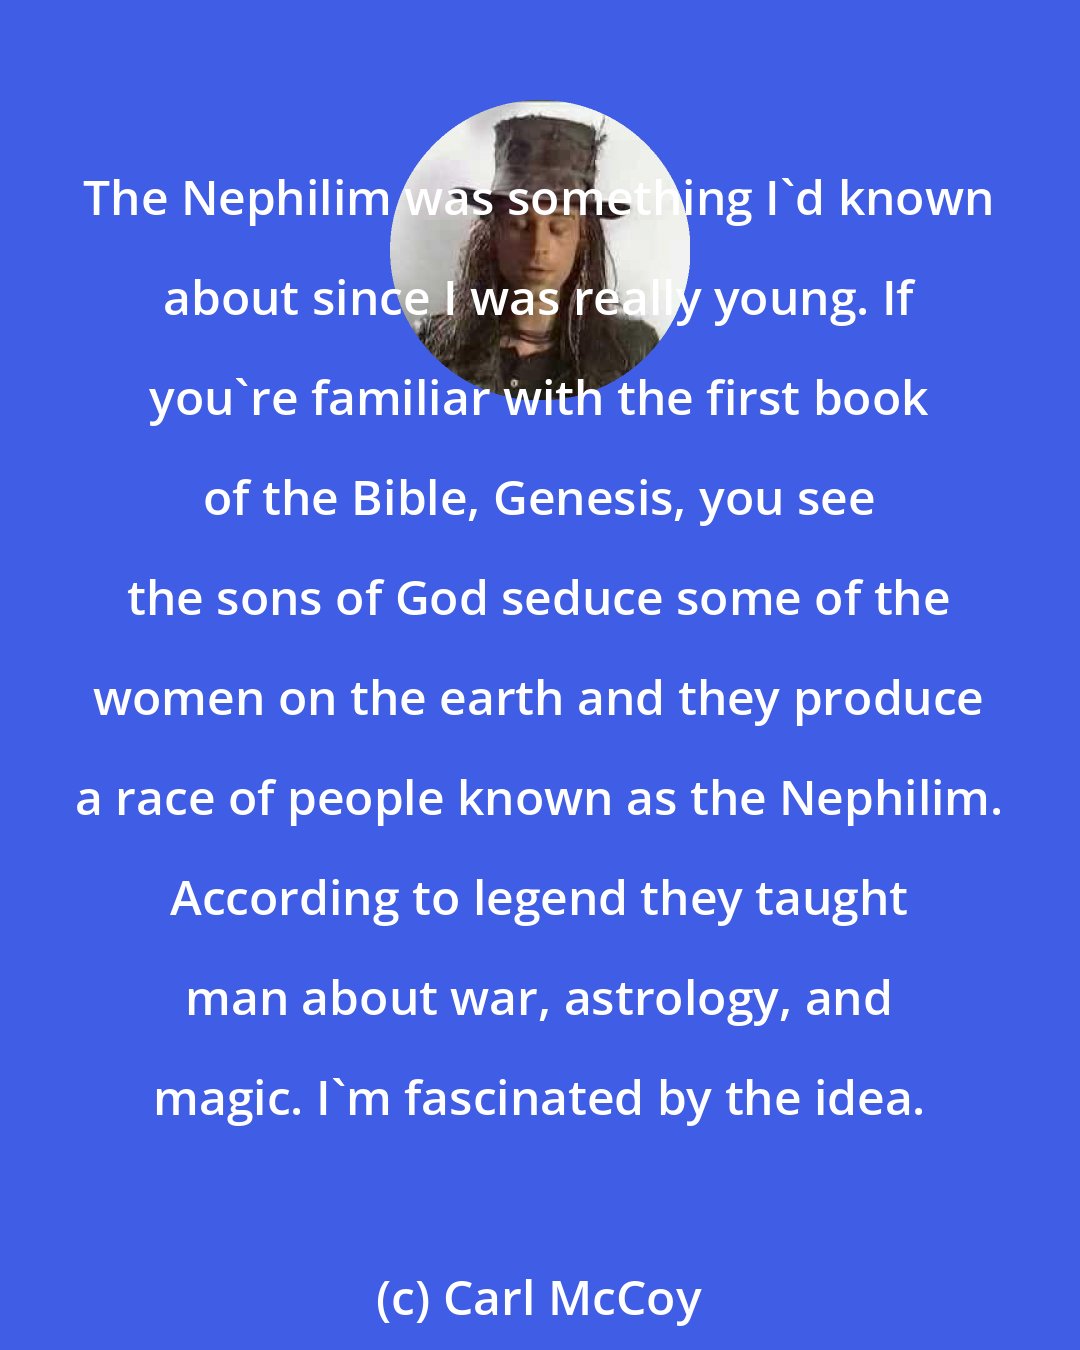 Carl McCoy: The Nephilim was something I'd known about since I was really young. If you're familiar with the first book of the Bible, Genesis, you see the sons of God seduce some of the women on the earth and they produce a race of people known as the Nephilim. According to legend they taught man about war, astrology, and magic. I'm fascinated by the idea.